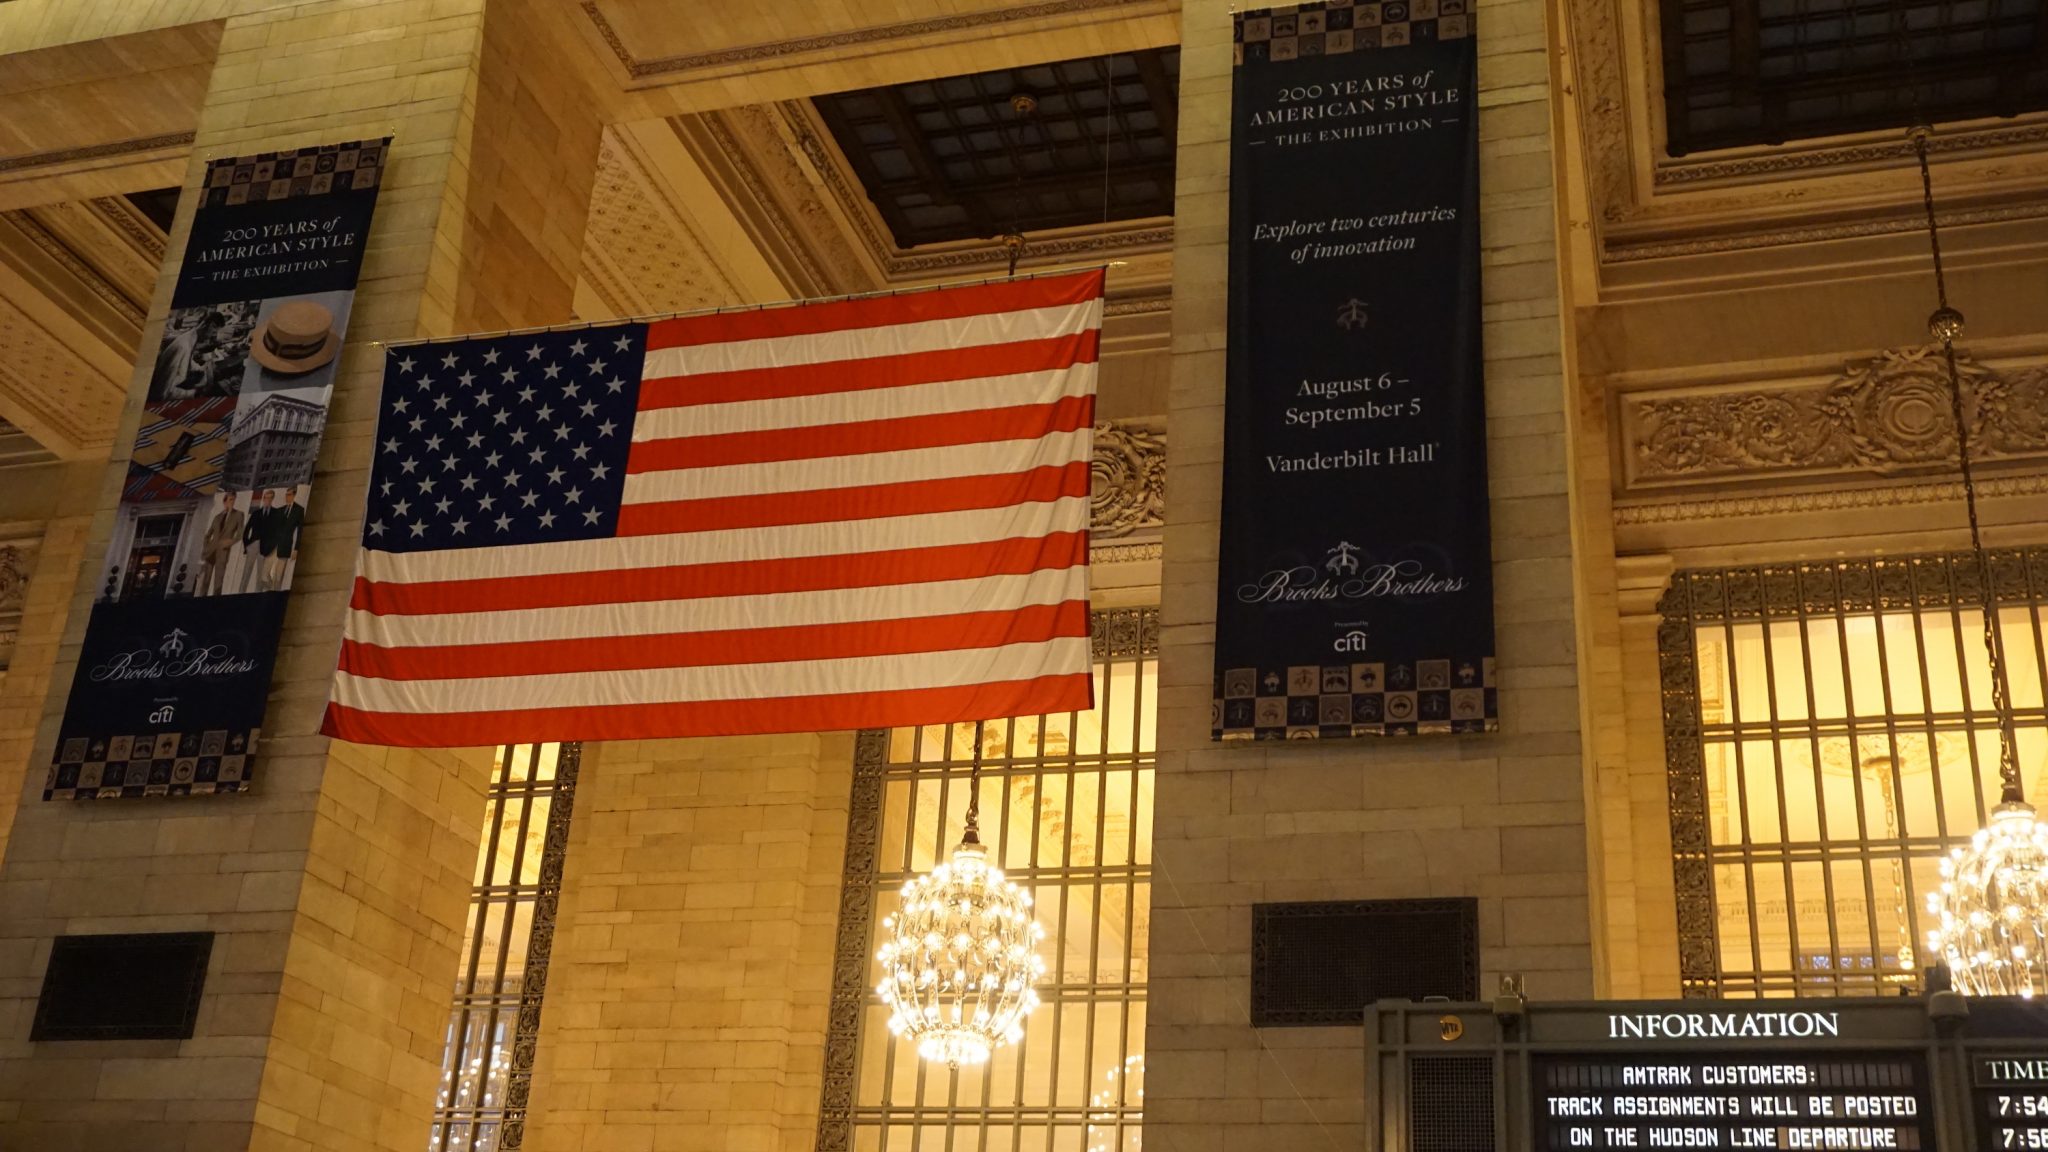 Grand Central Terminal Station New York Itinerary Travel Guide Main Hall American Flag